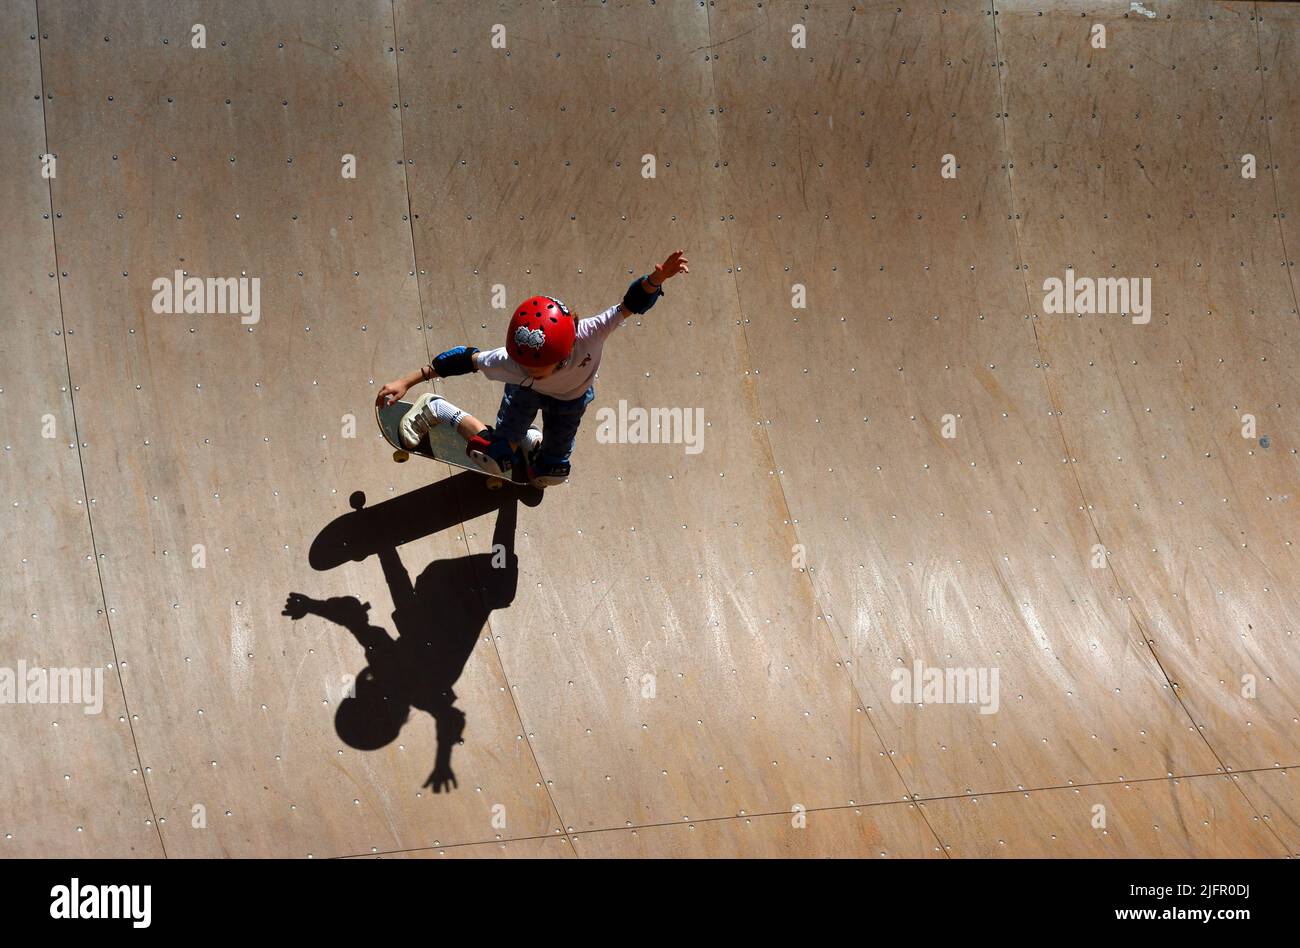 Skateboarder on ramp  with strong shadow Stock Photo